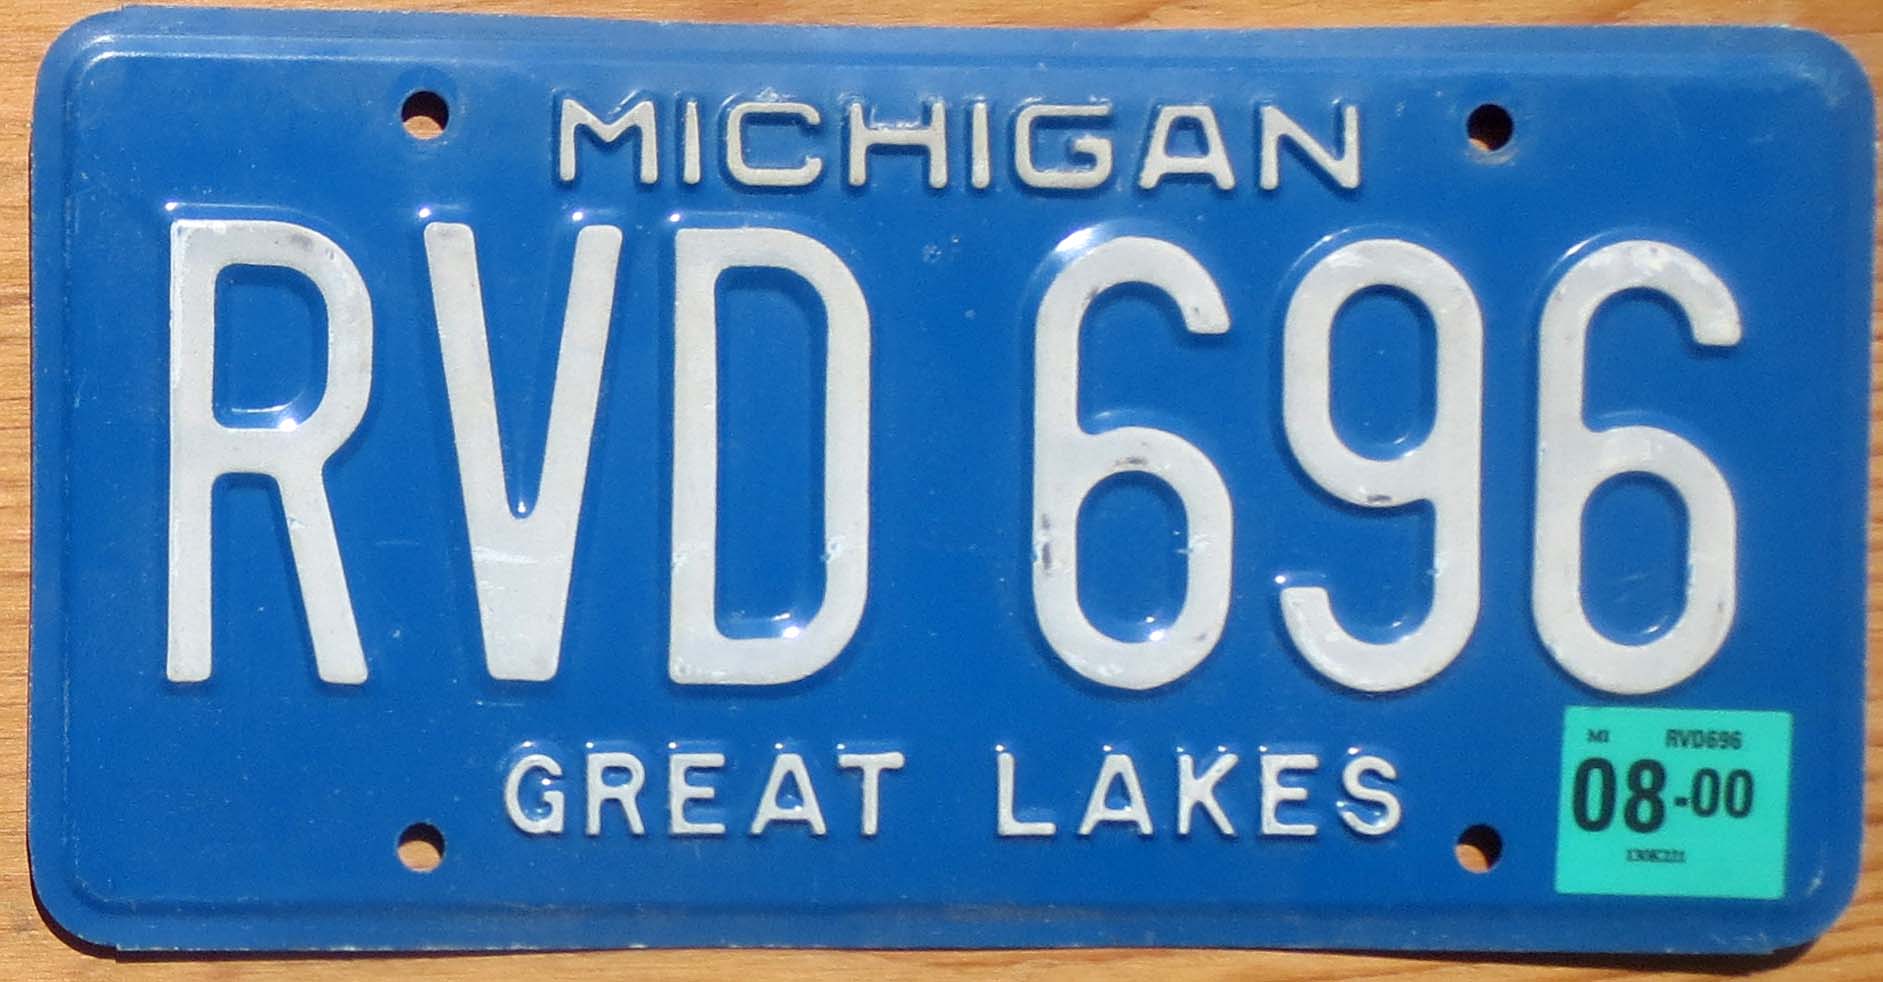 michigan and plate tags and colors